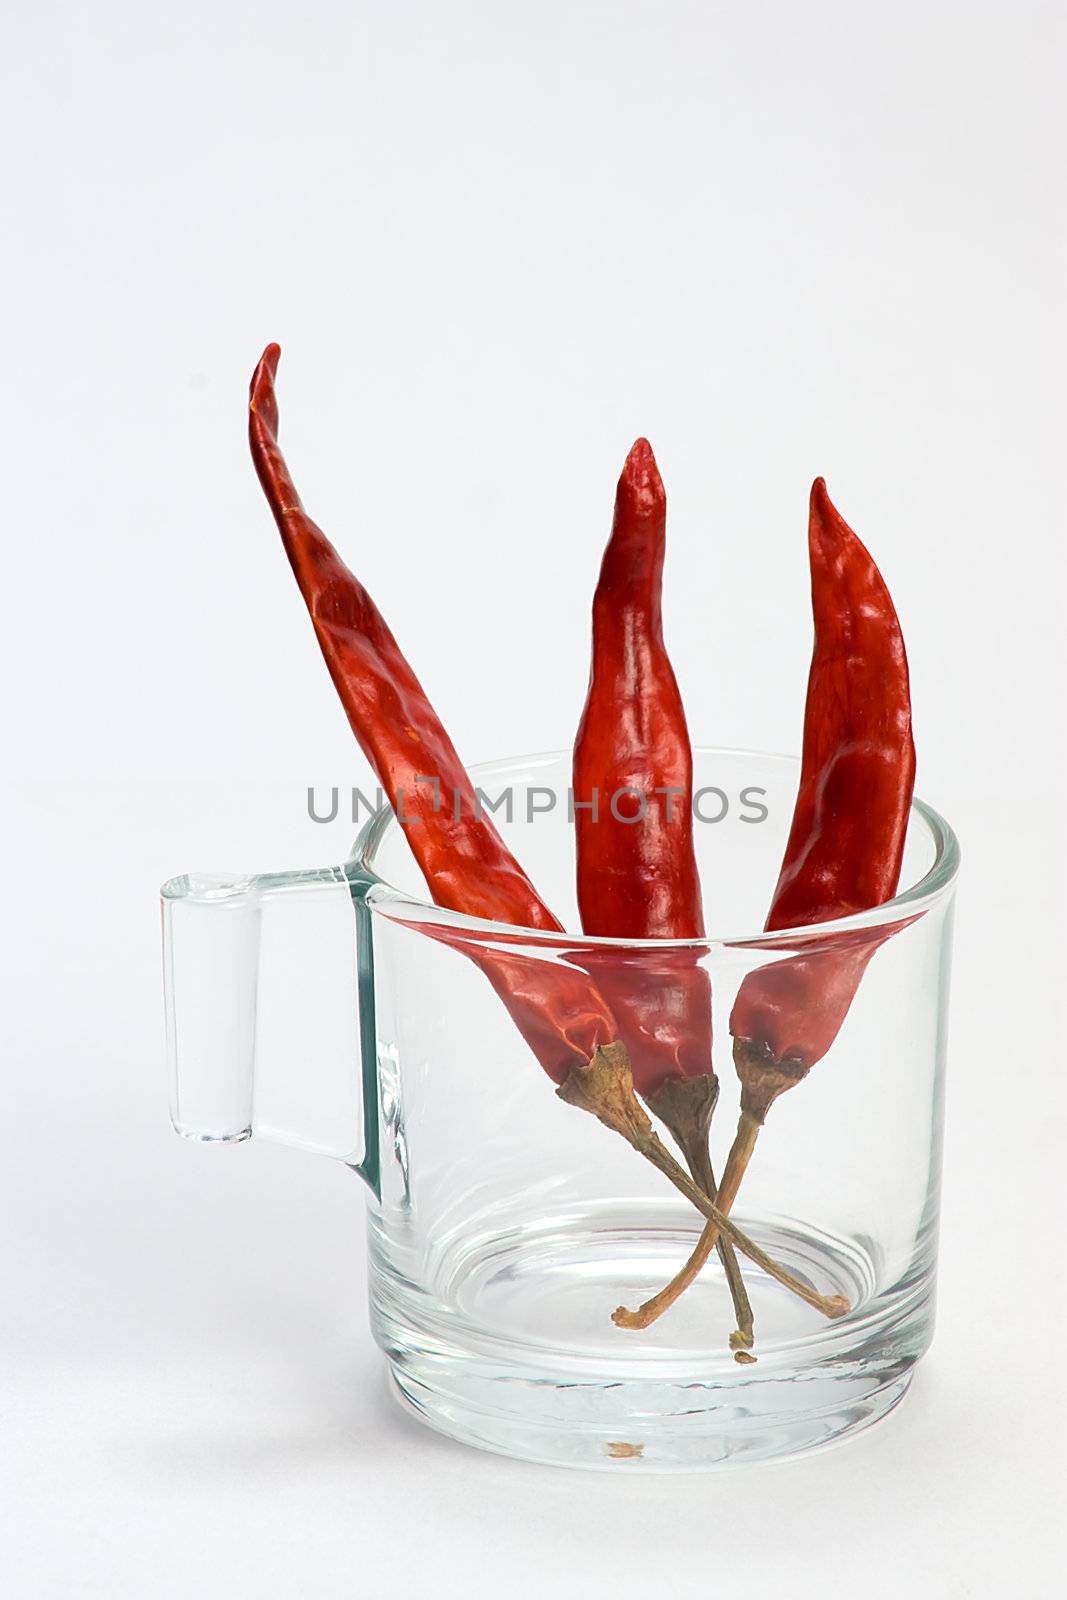 Macro shot of red hot chili peppers with white cup 